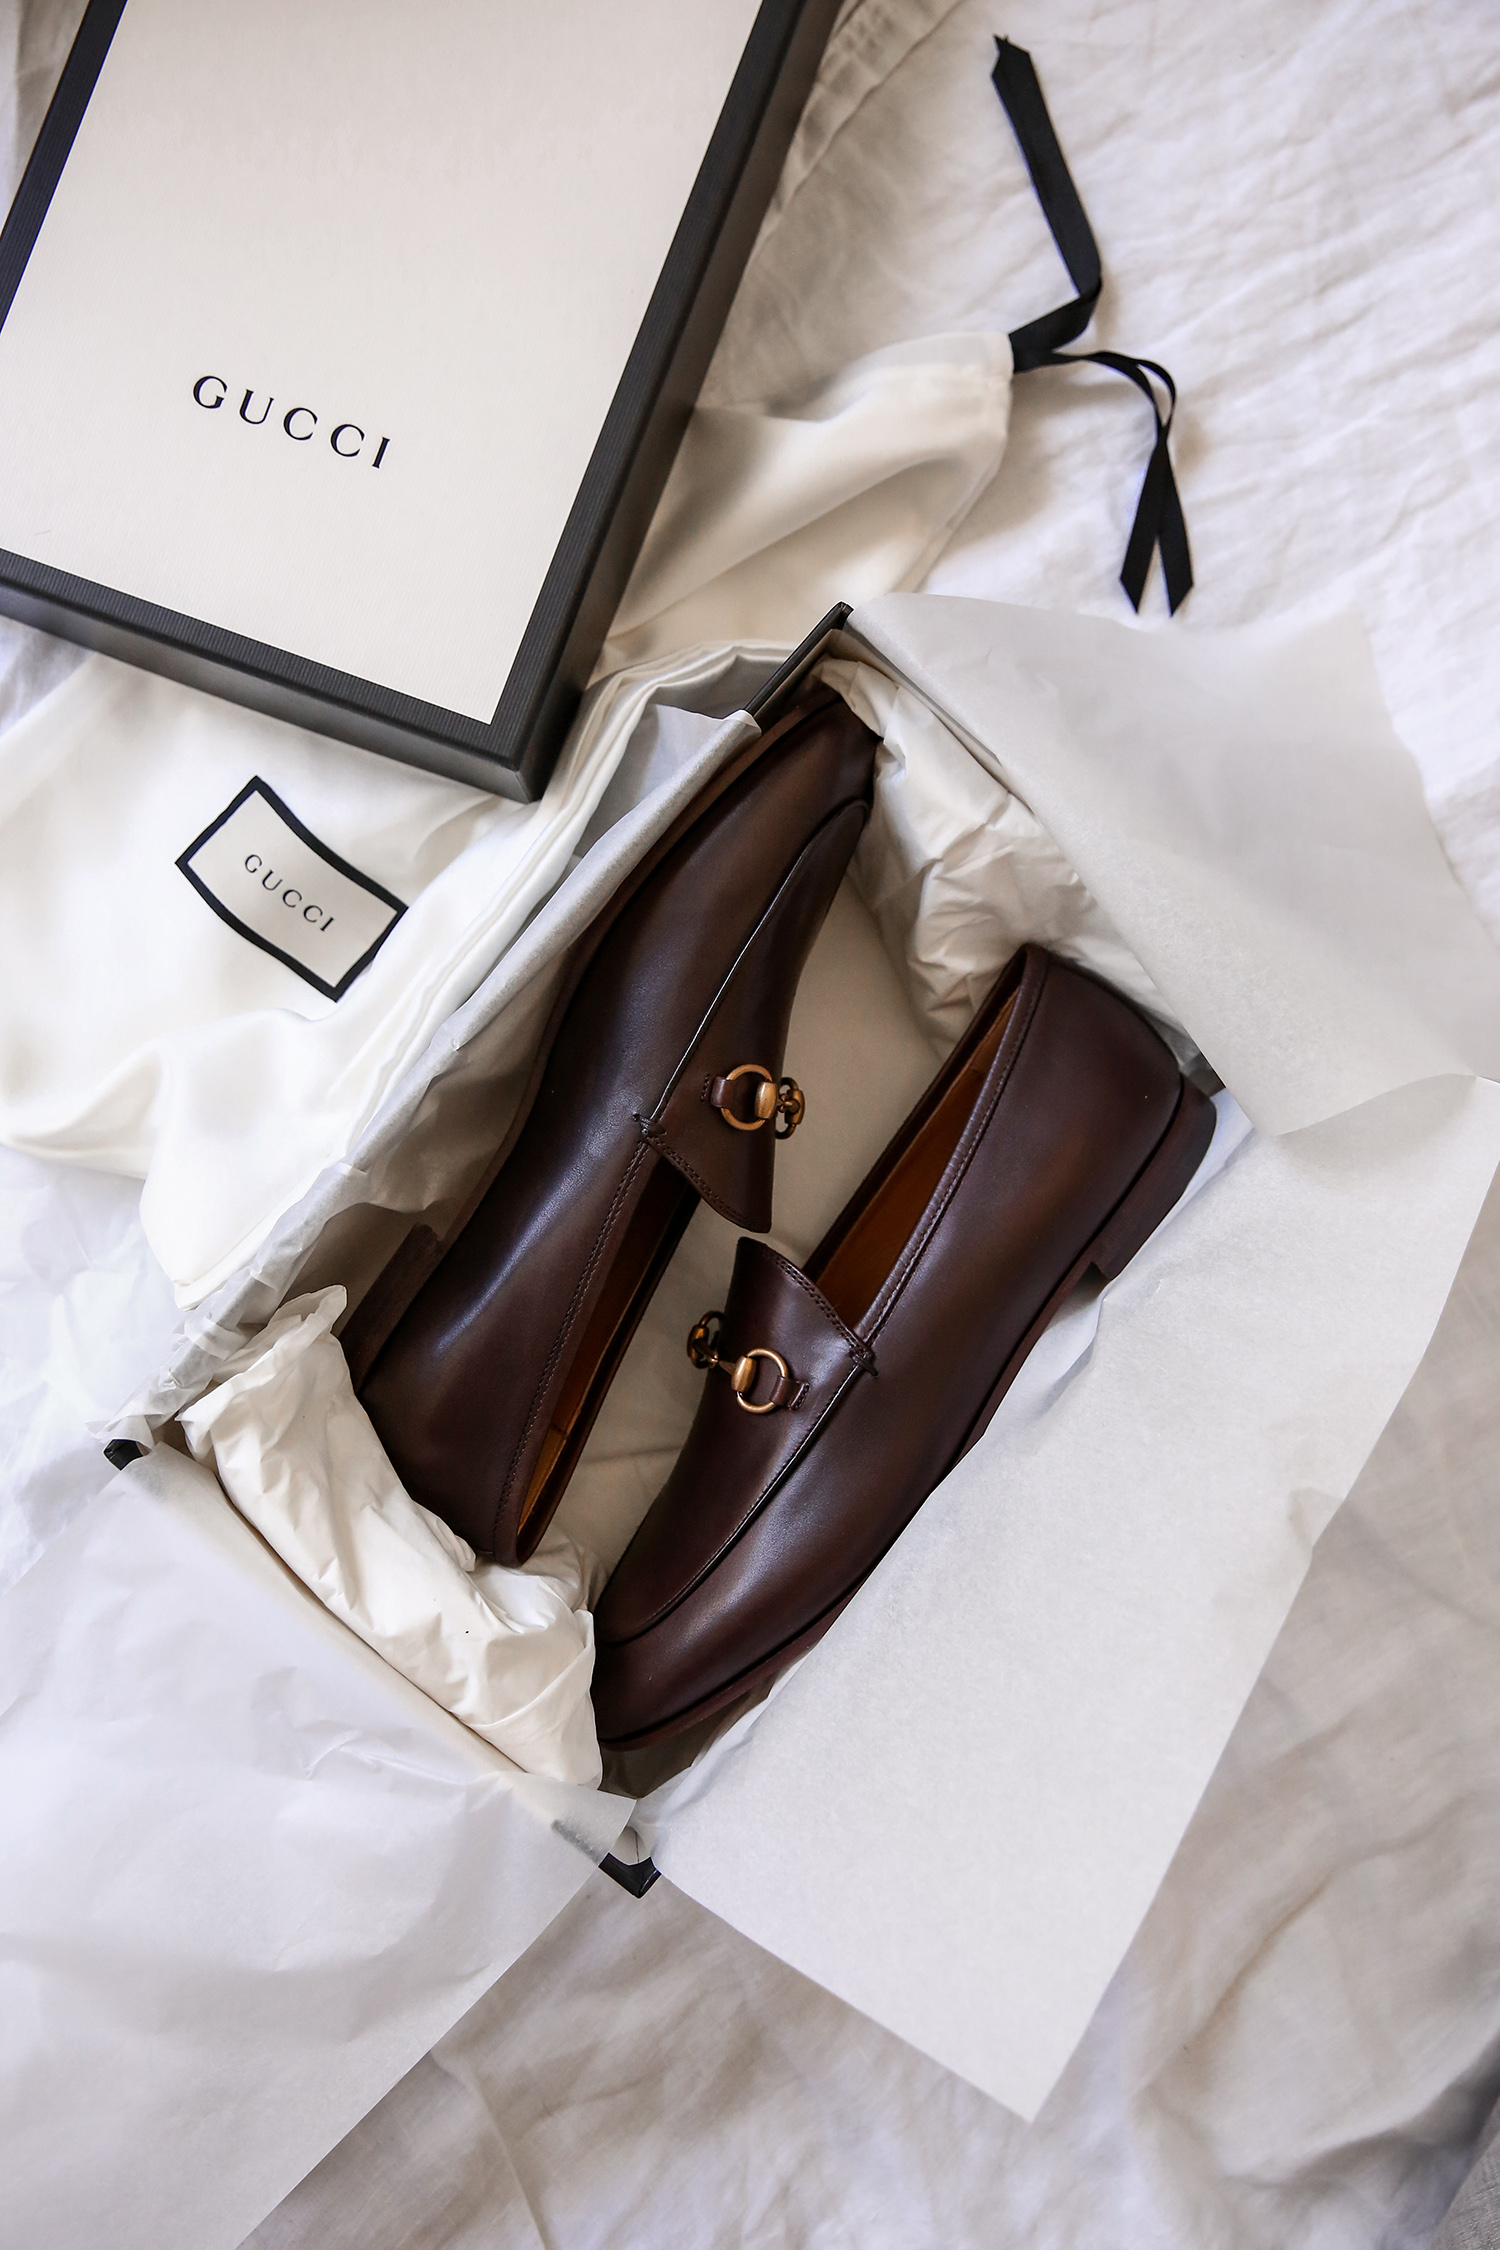 Gucci Jordaan loafers review in brown leather